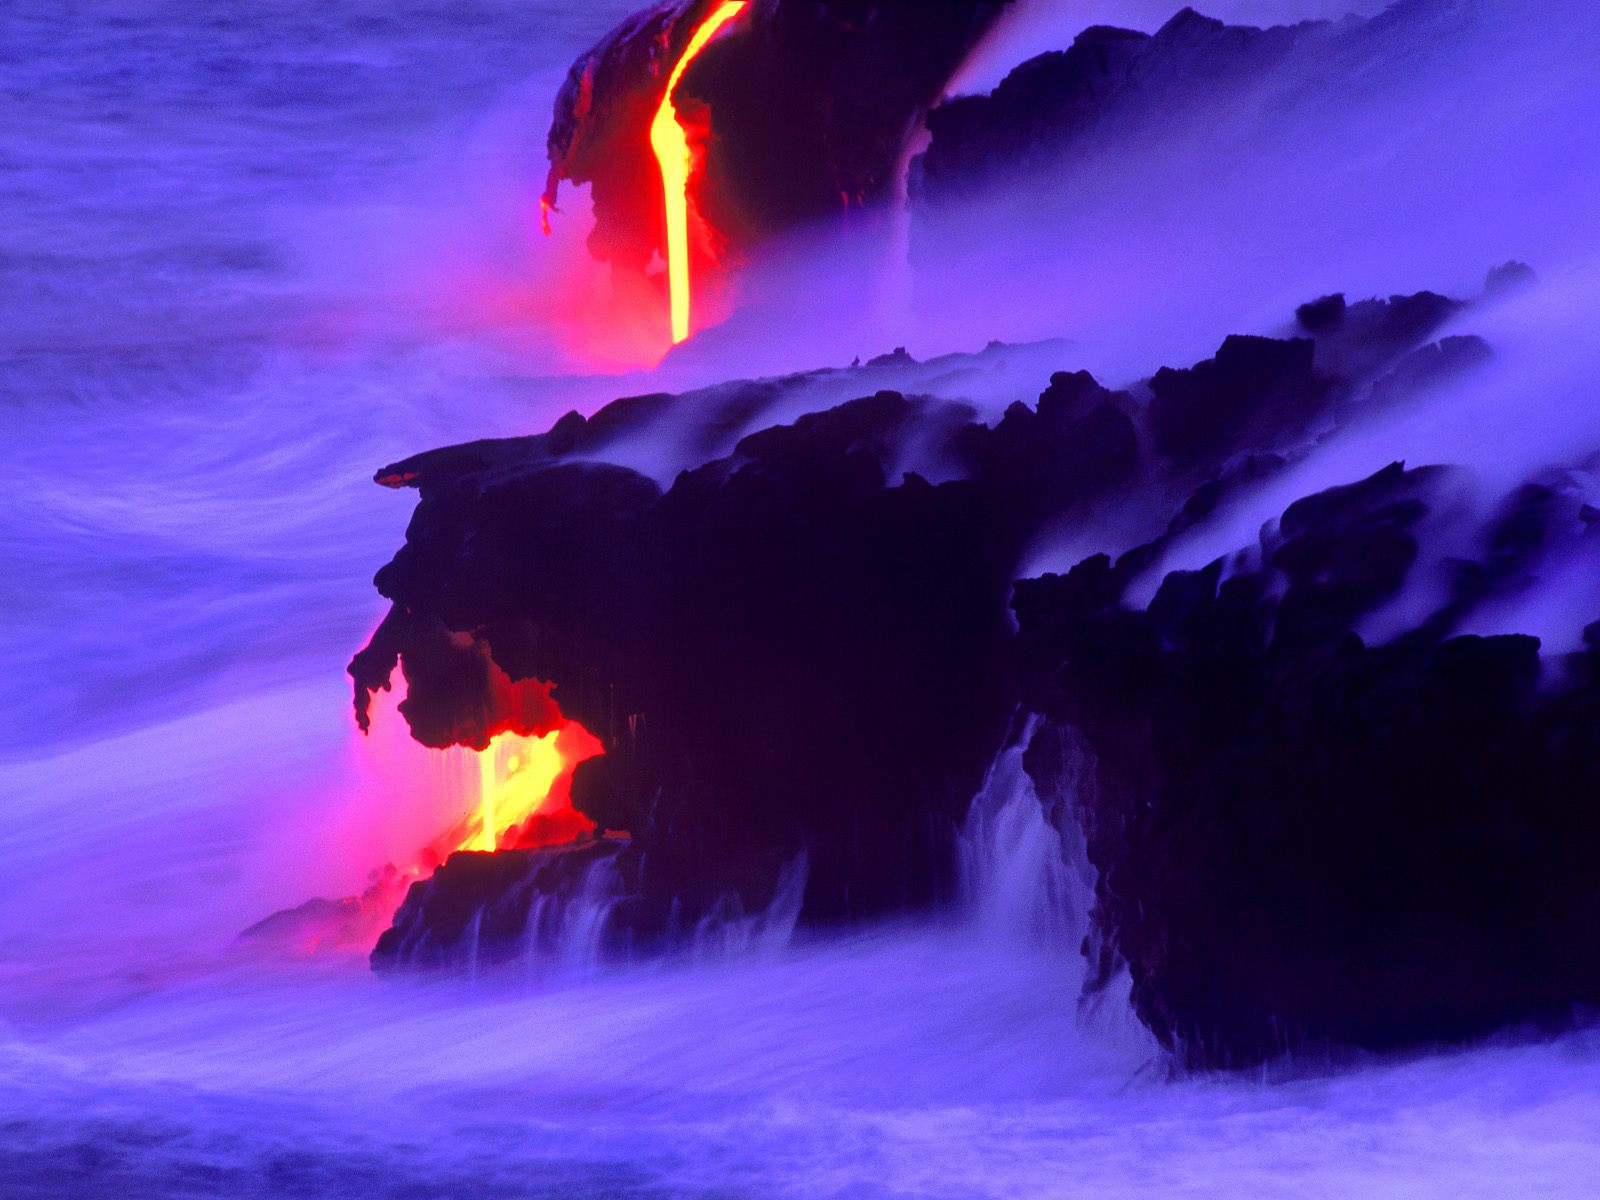 Lava Full HD, HDTV, 1080p 16:9 Wallpapers, HD Lava 1920x1080 Backgrounds,  Free Images Download